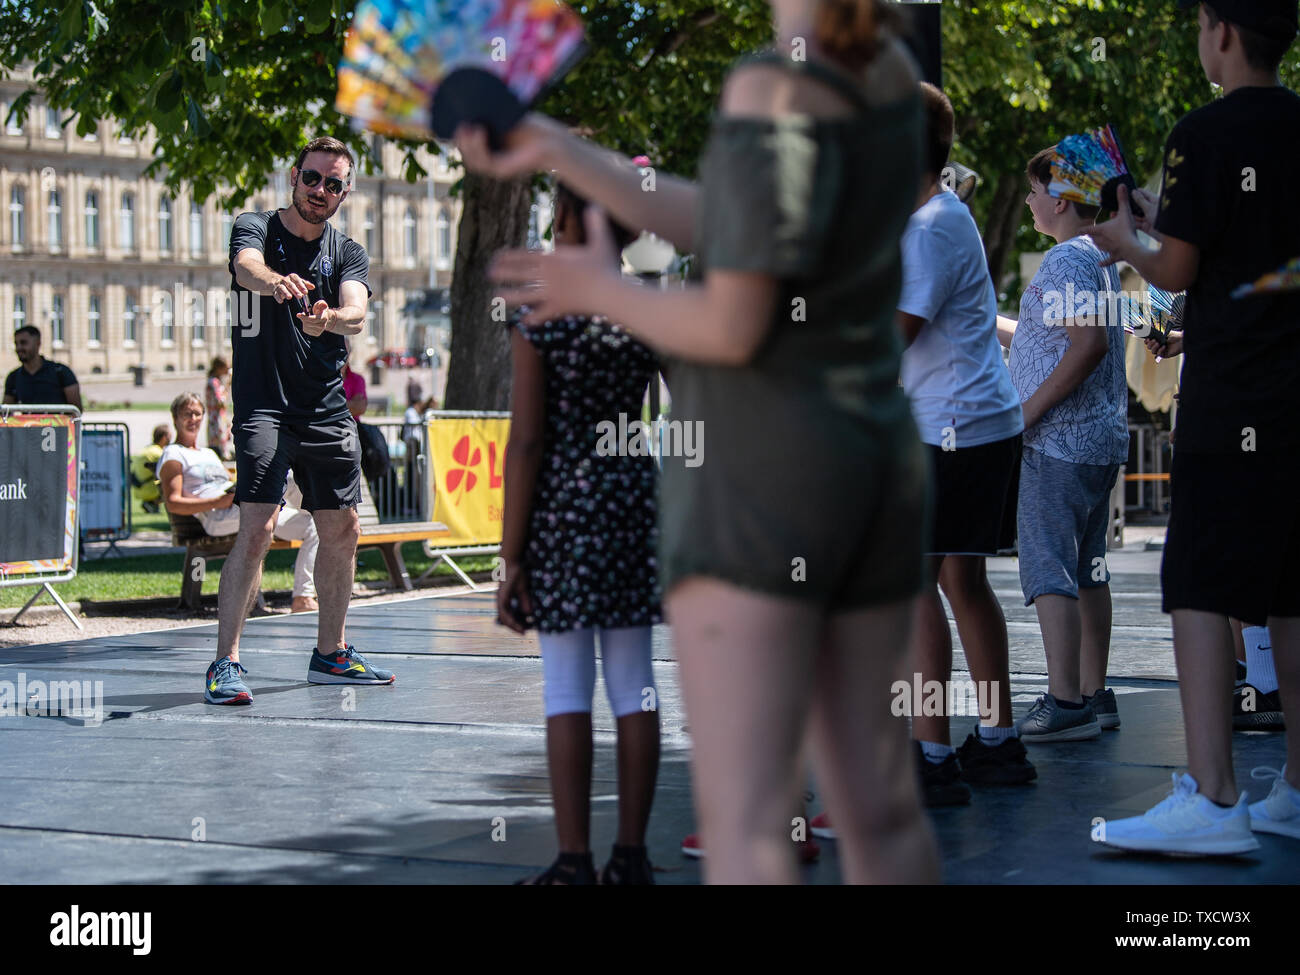 Stuttgart, Germany. 24th June, 2019. Eric Gauthier, director of the Compagnie Gauthier Dance, dances with a school class on the Schlossplatz in Stuttgart. The third edition of the 18-day dance festival 'Colours' presents 20 productions in the Theaterhaus in addition to public workshops, dance teas and performances in the city centre. Credit: Fabian Sommer/dpa/Alamy Live News Stock Photo